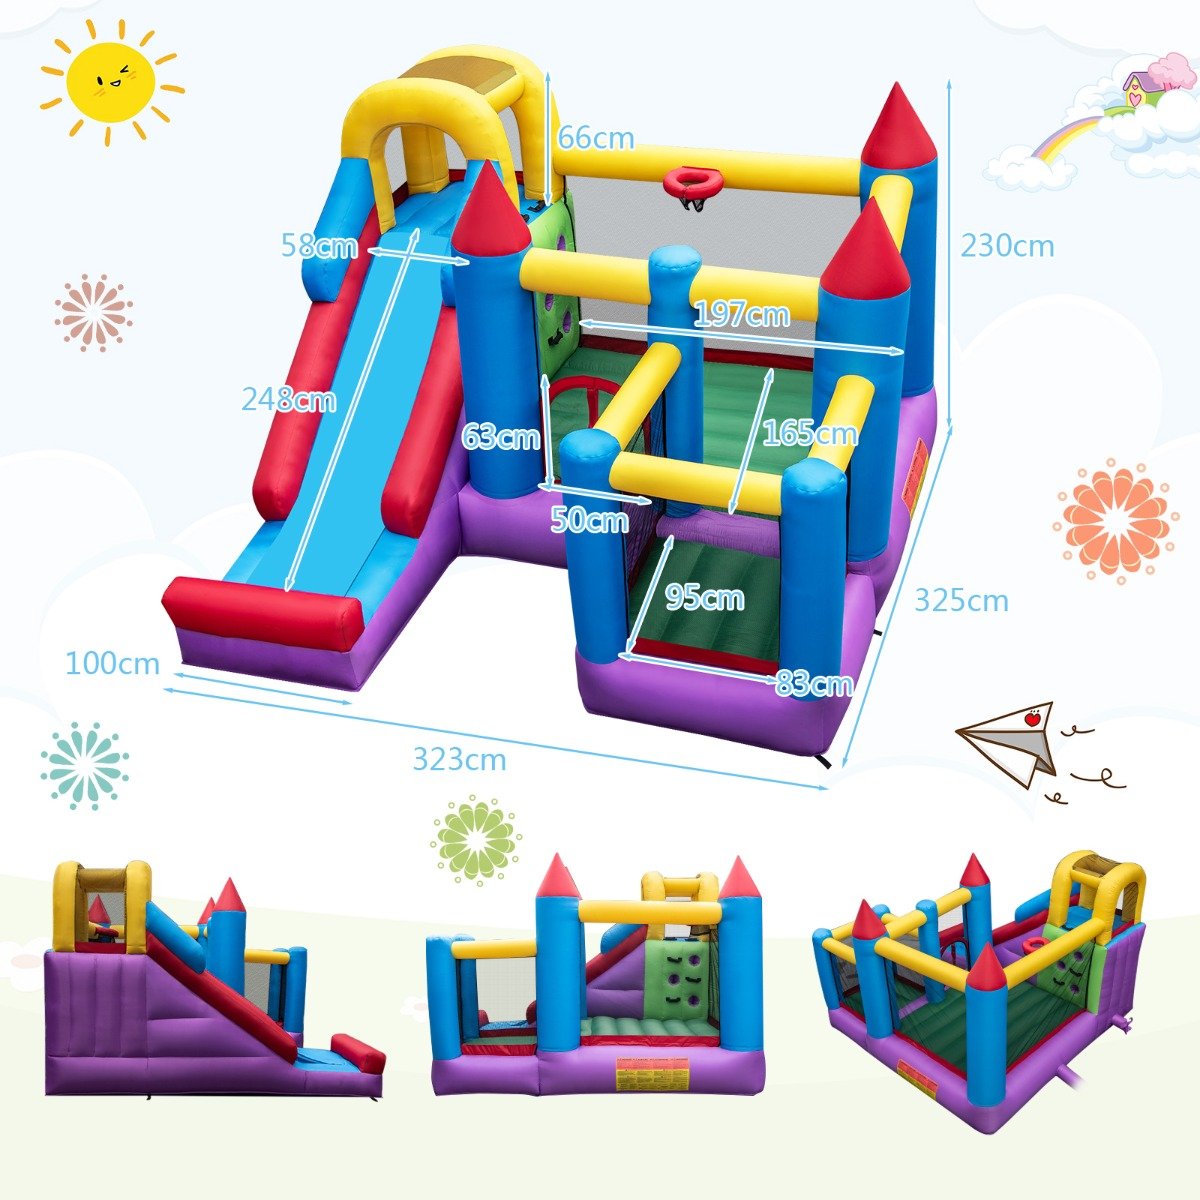 Inflatable Bounce House with Slide, Trampoline & Playful Activities (No Blower)